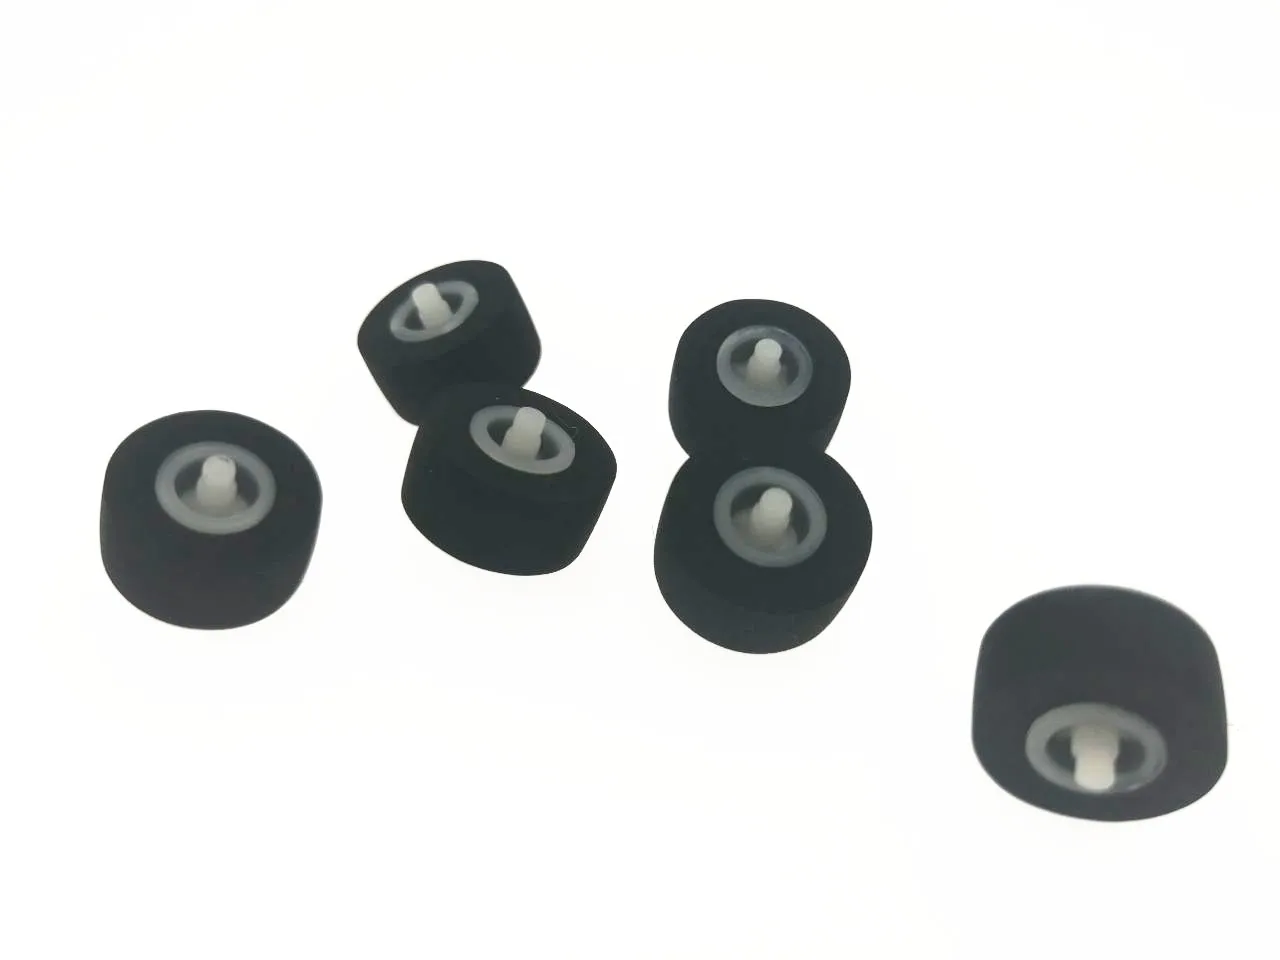 Black Rubber Audio Bearing Roller Guide Pulley for Car Radios Players Amplifiers 13x6x2.5mm Video Tape Belt Pulley Xstyle 5Pcs Recorder Pinch Roller 